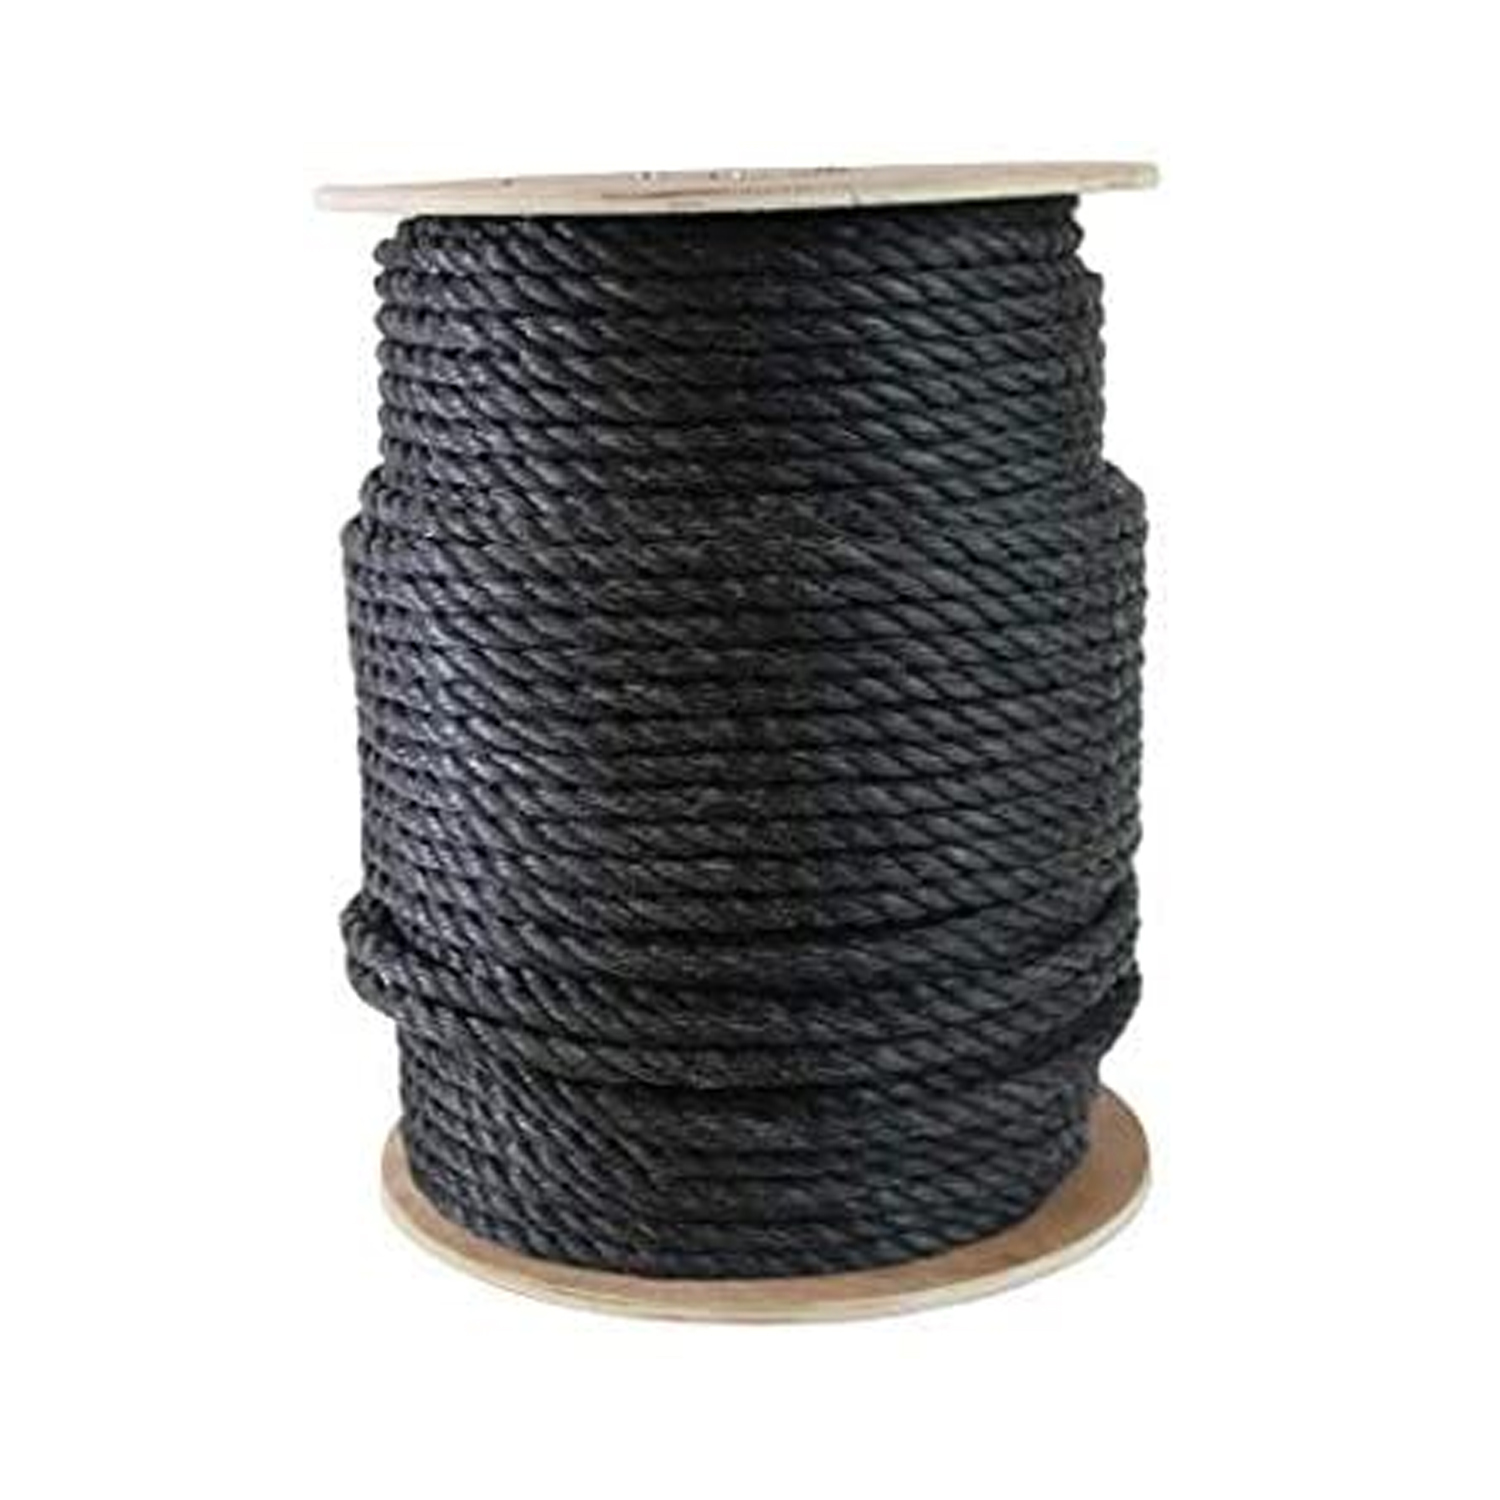 General Work Products PPMB1/4 3-Strand Twisted Polypropylene Rope Mono